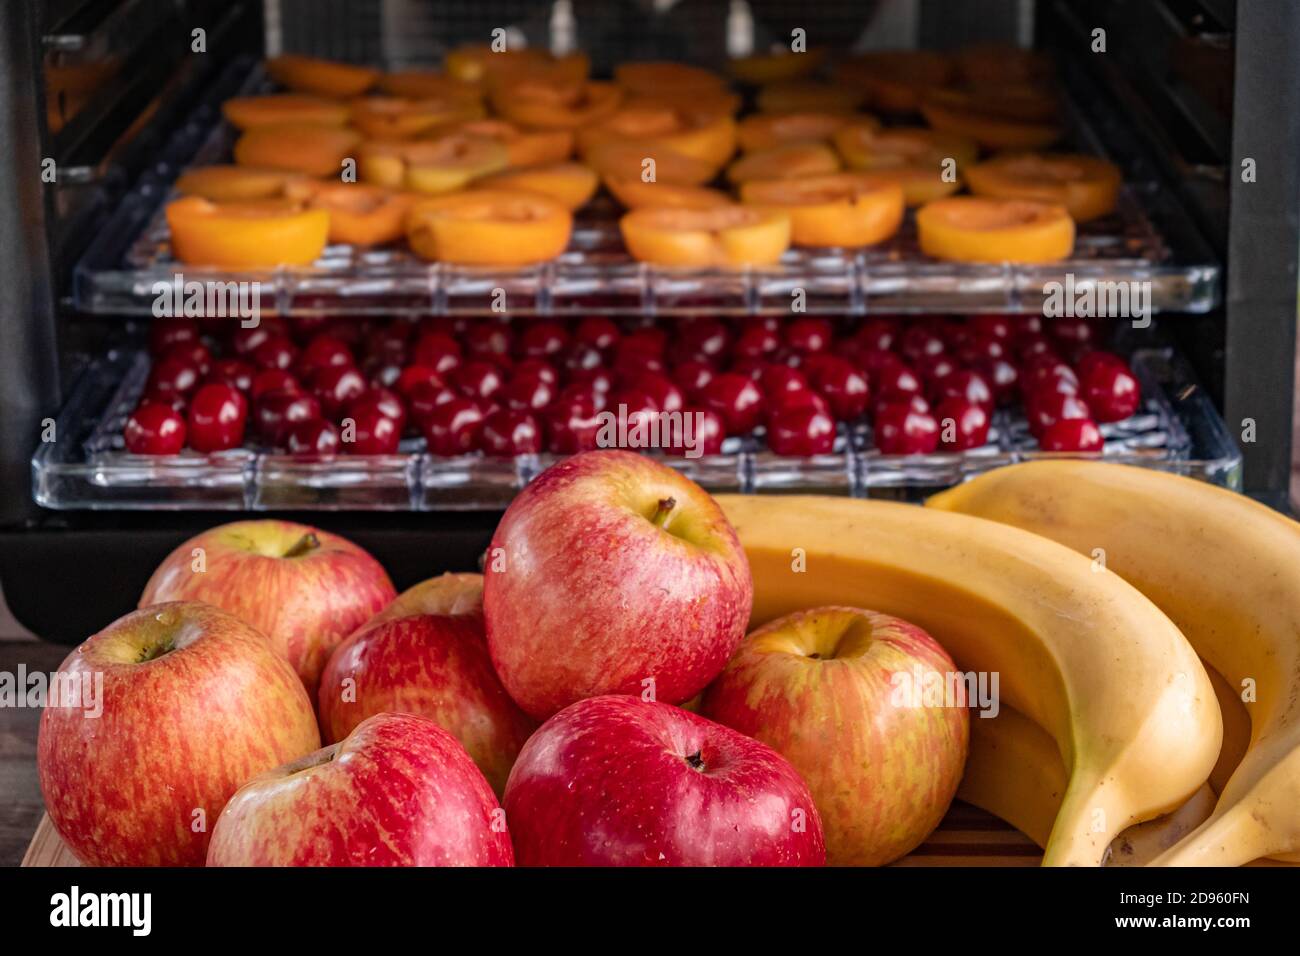 Fresh red apples and bananas on a chopping Board. In the background, a drying machine for dehydration with horizontal loading of trays. There are apri Stock Photo